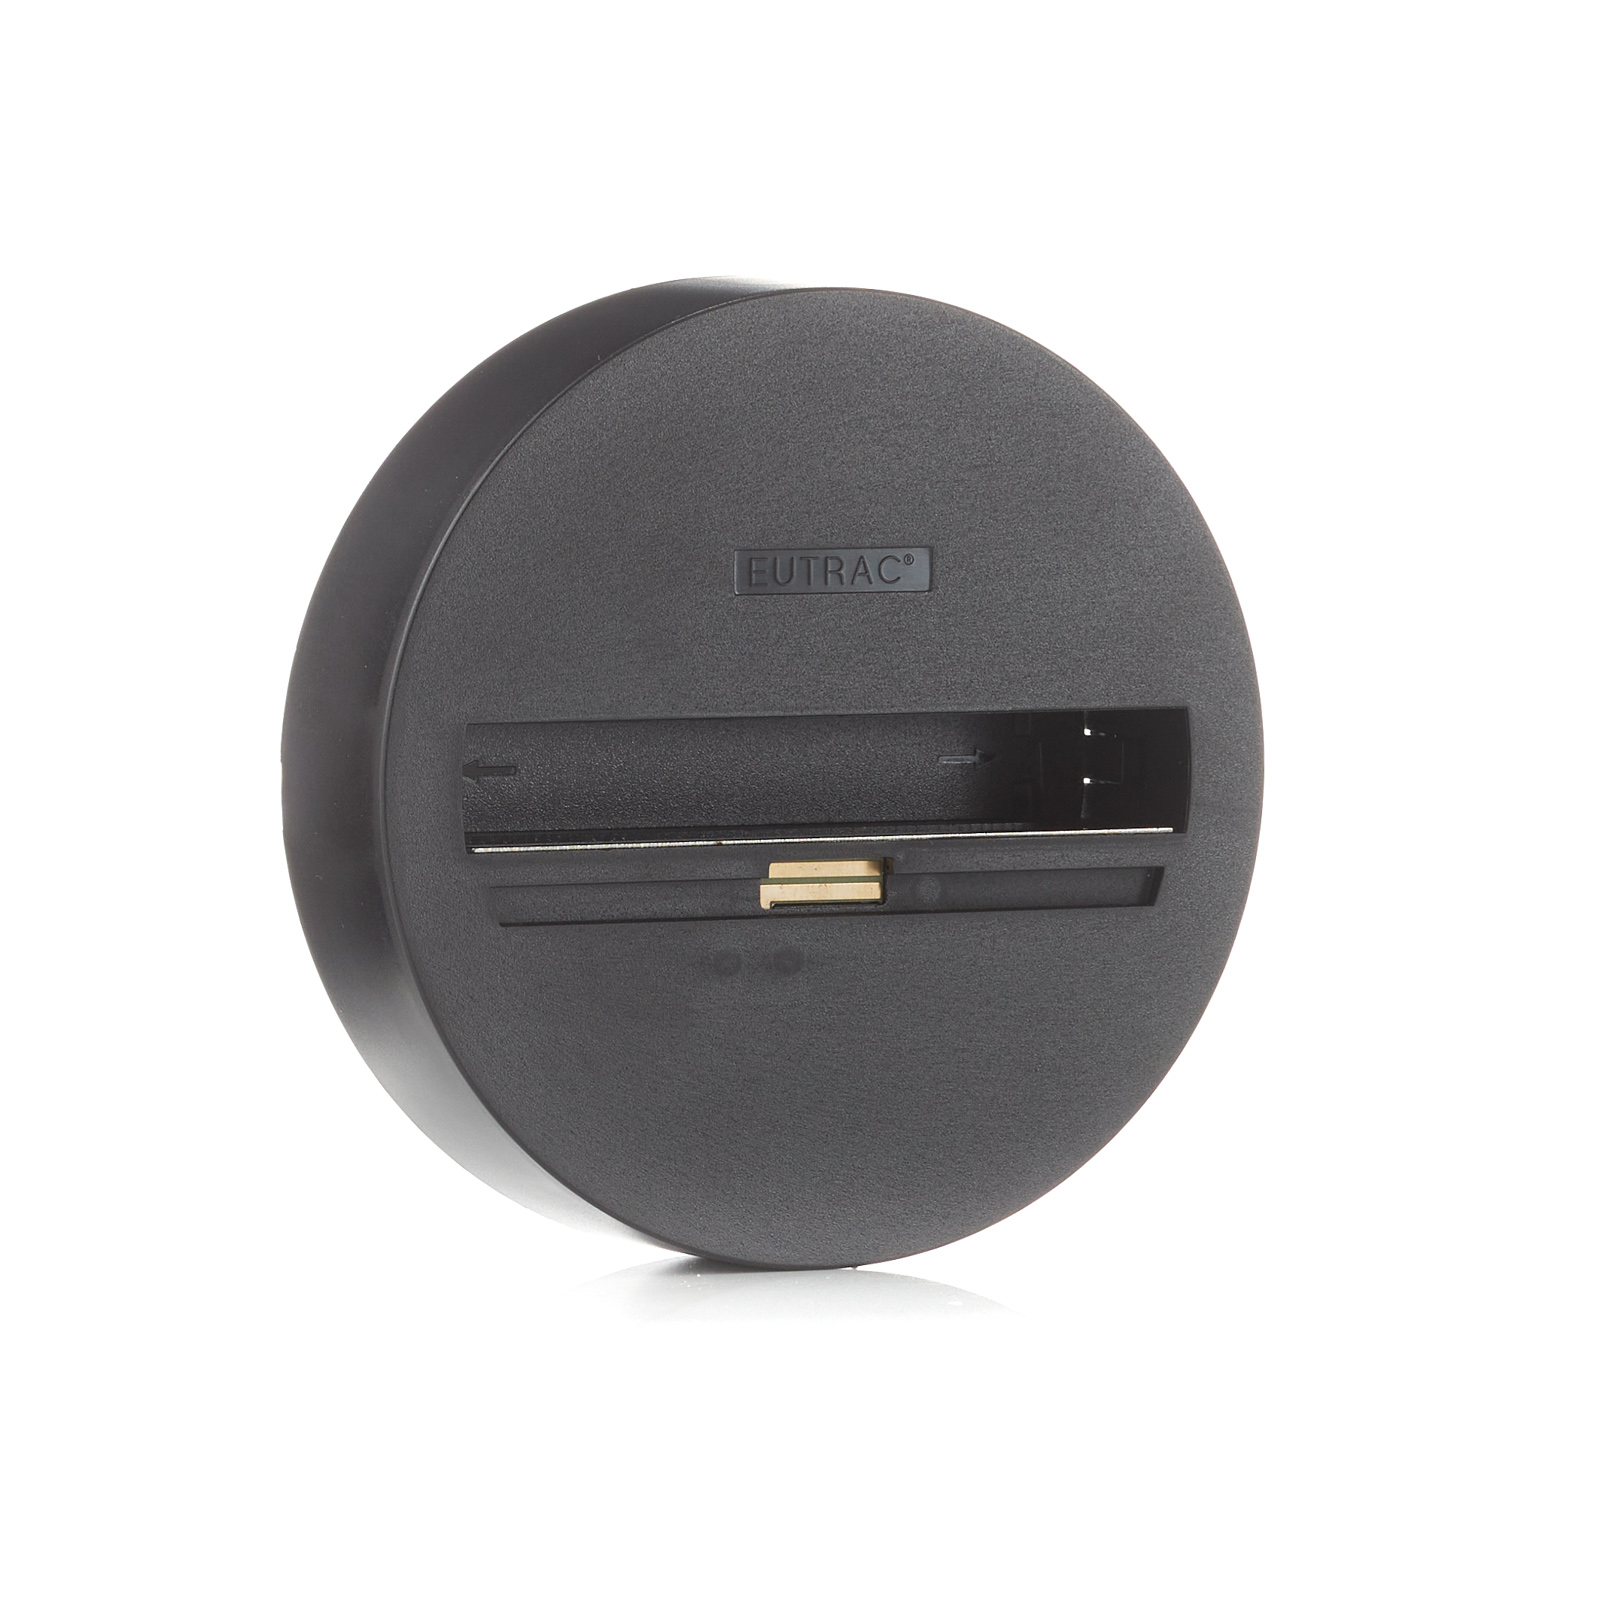 Eutrac surface point outlet 3-circuit, black